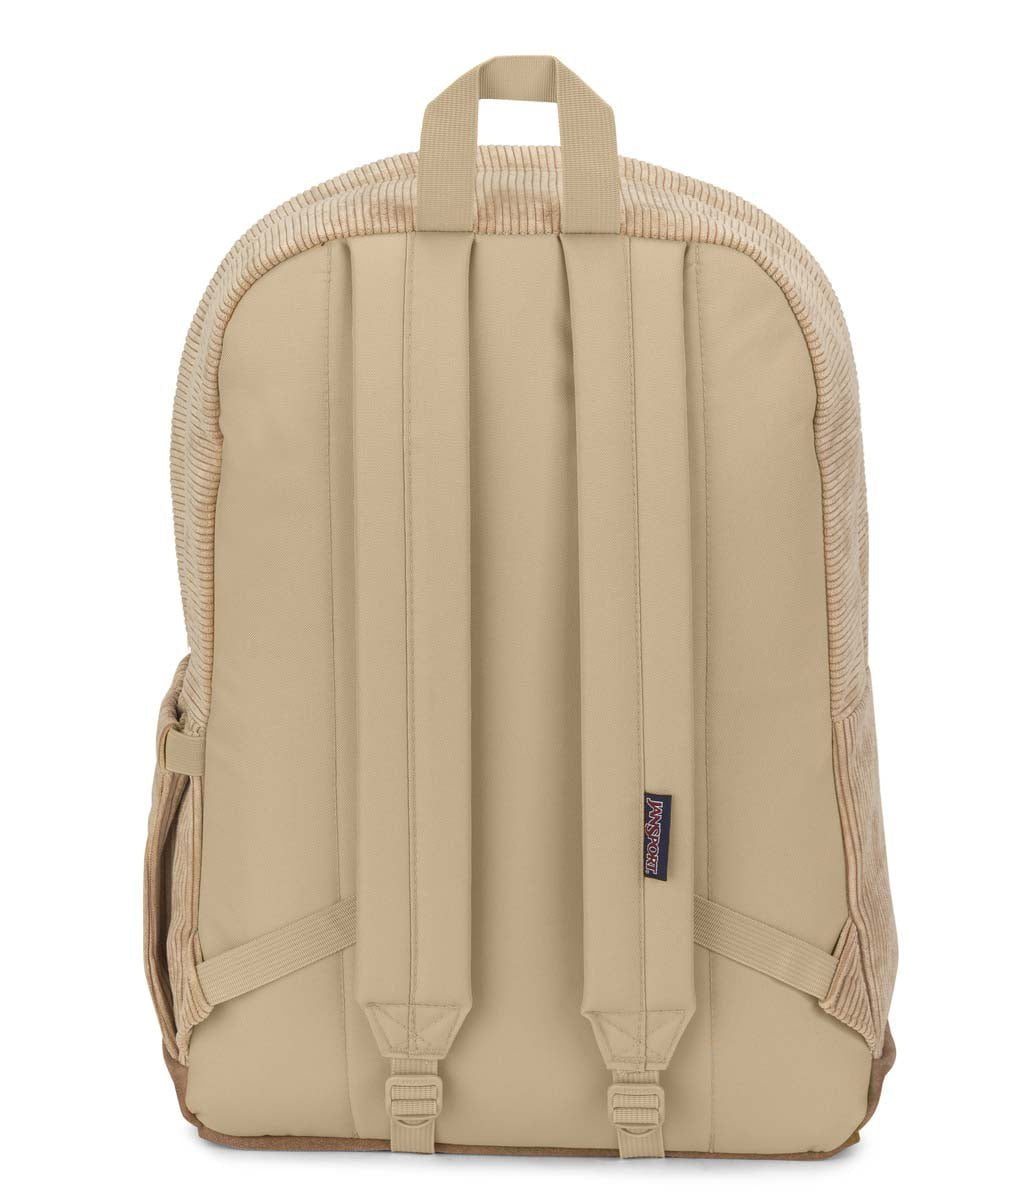 JanSport Right Pack Expressions - Curry Corduroy